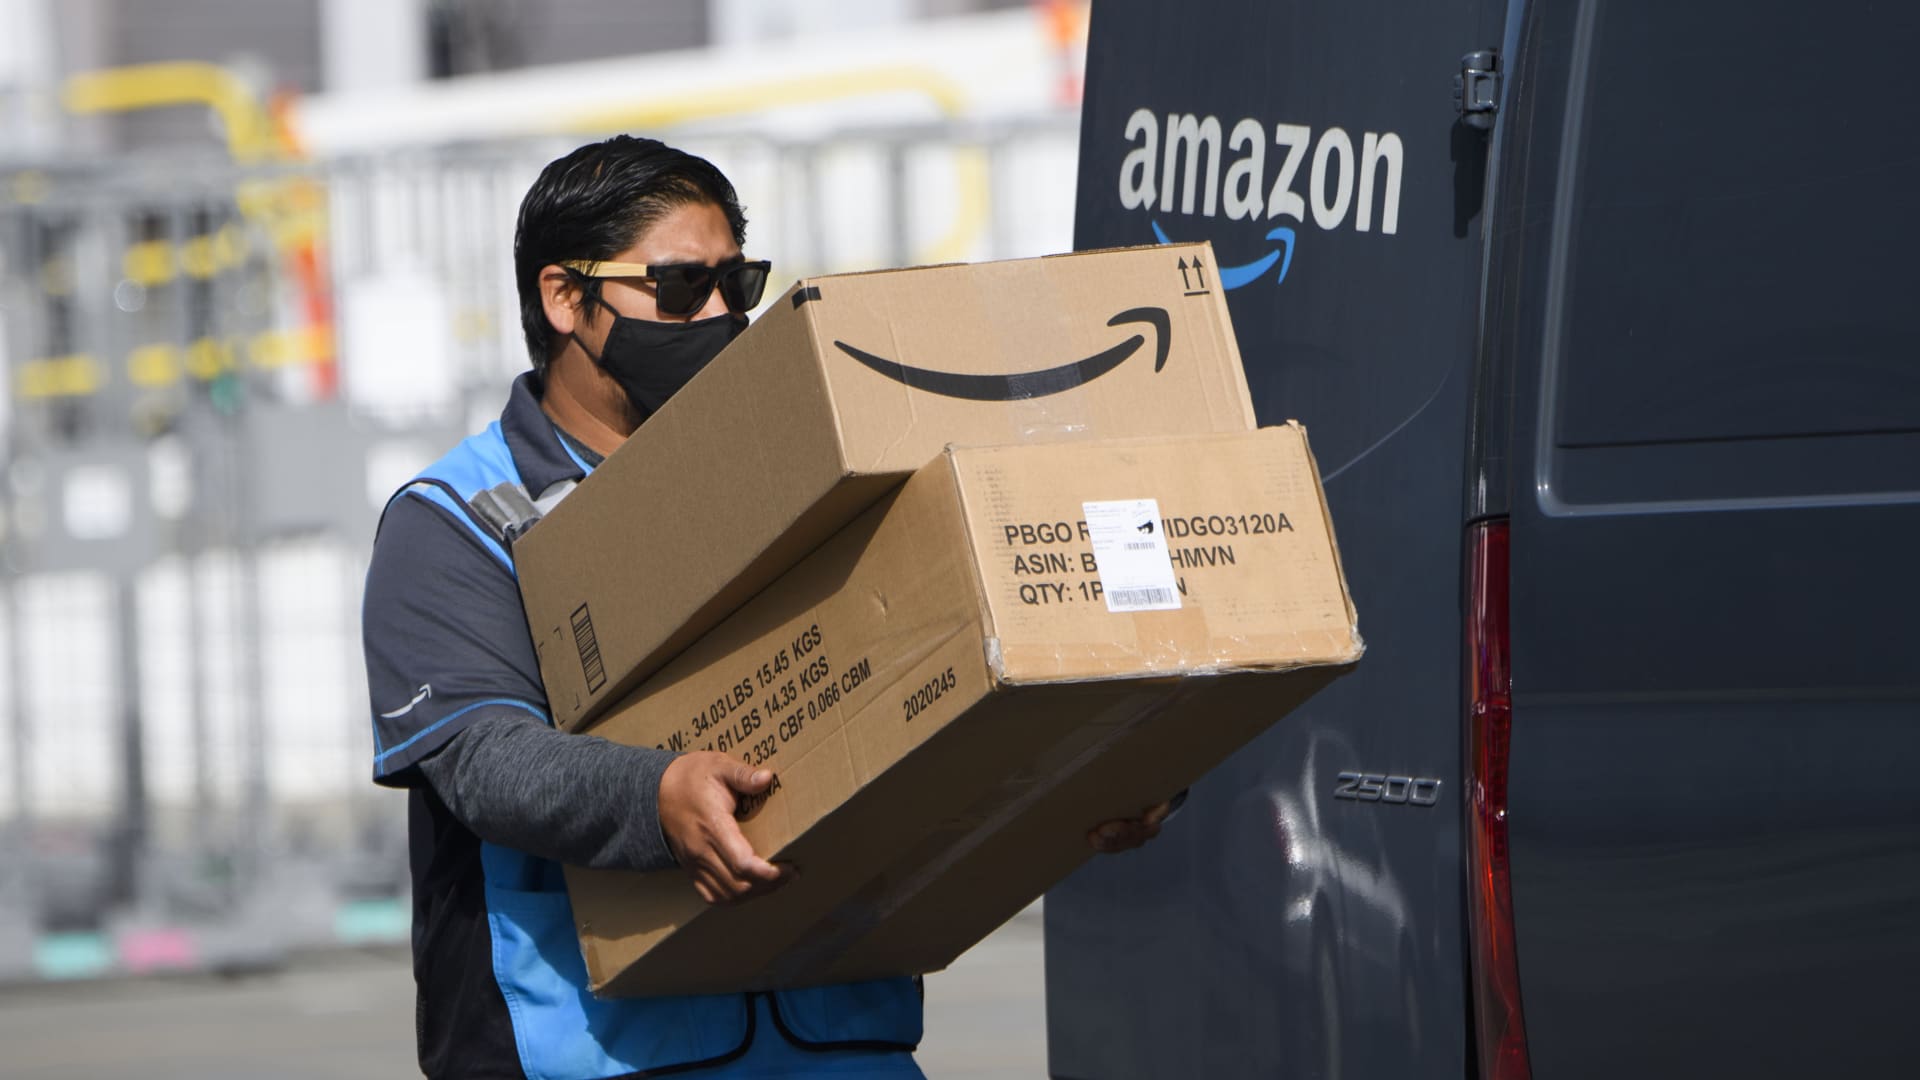 Amazon delivery drivers in southern California join Teamsters union